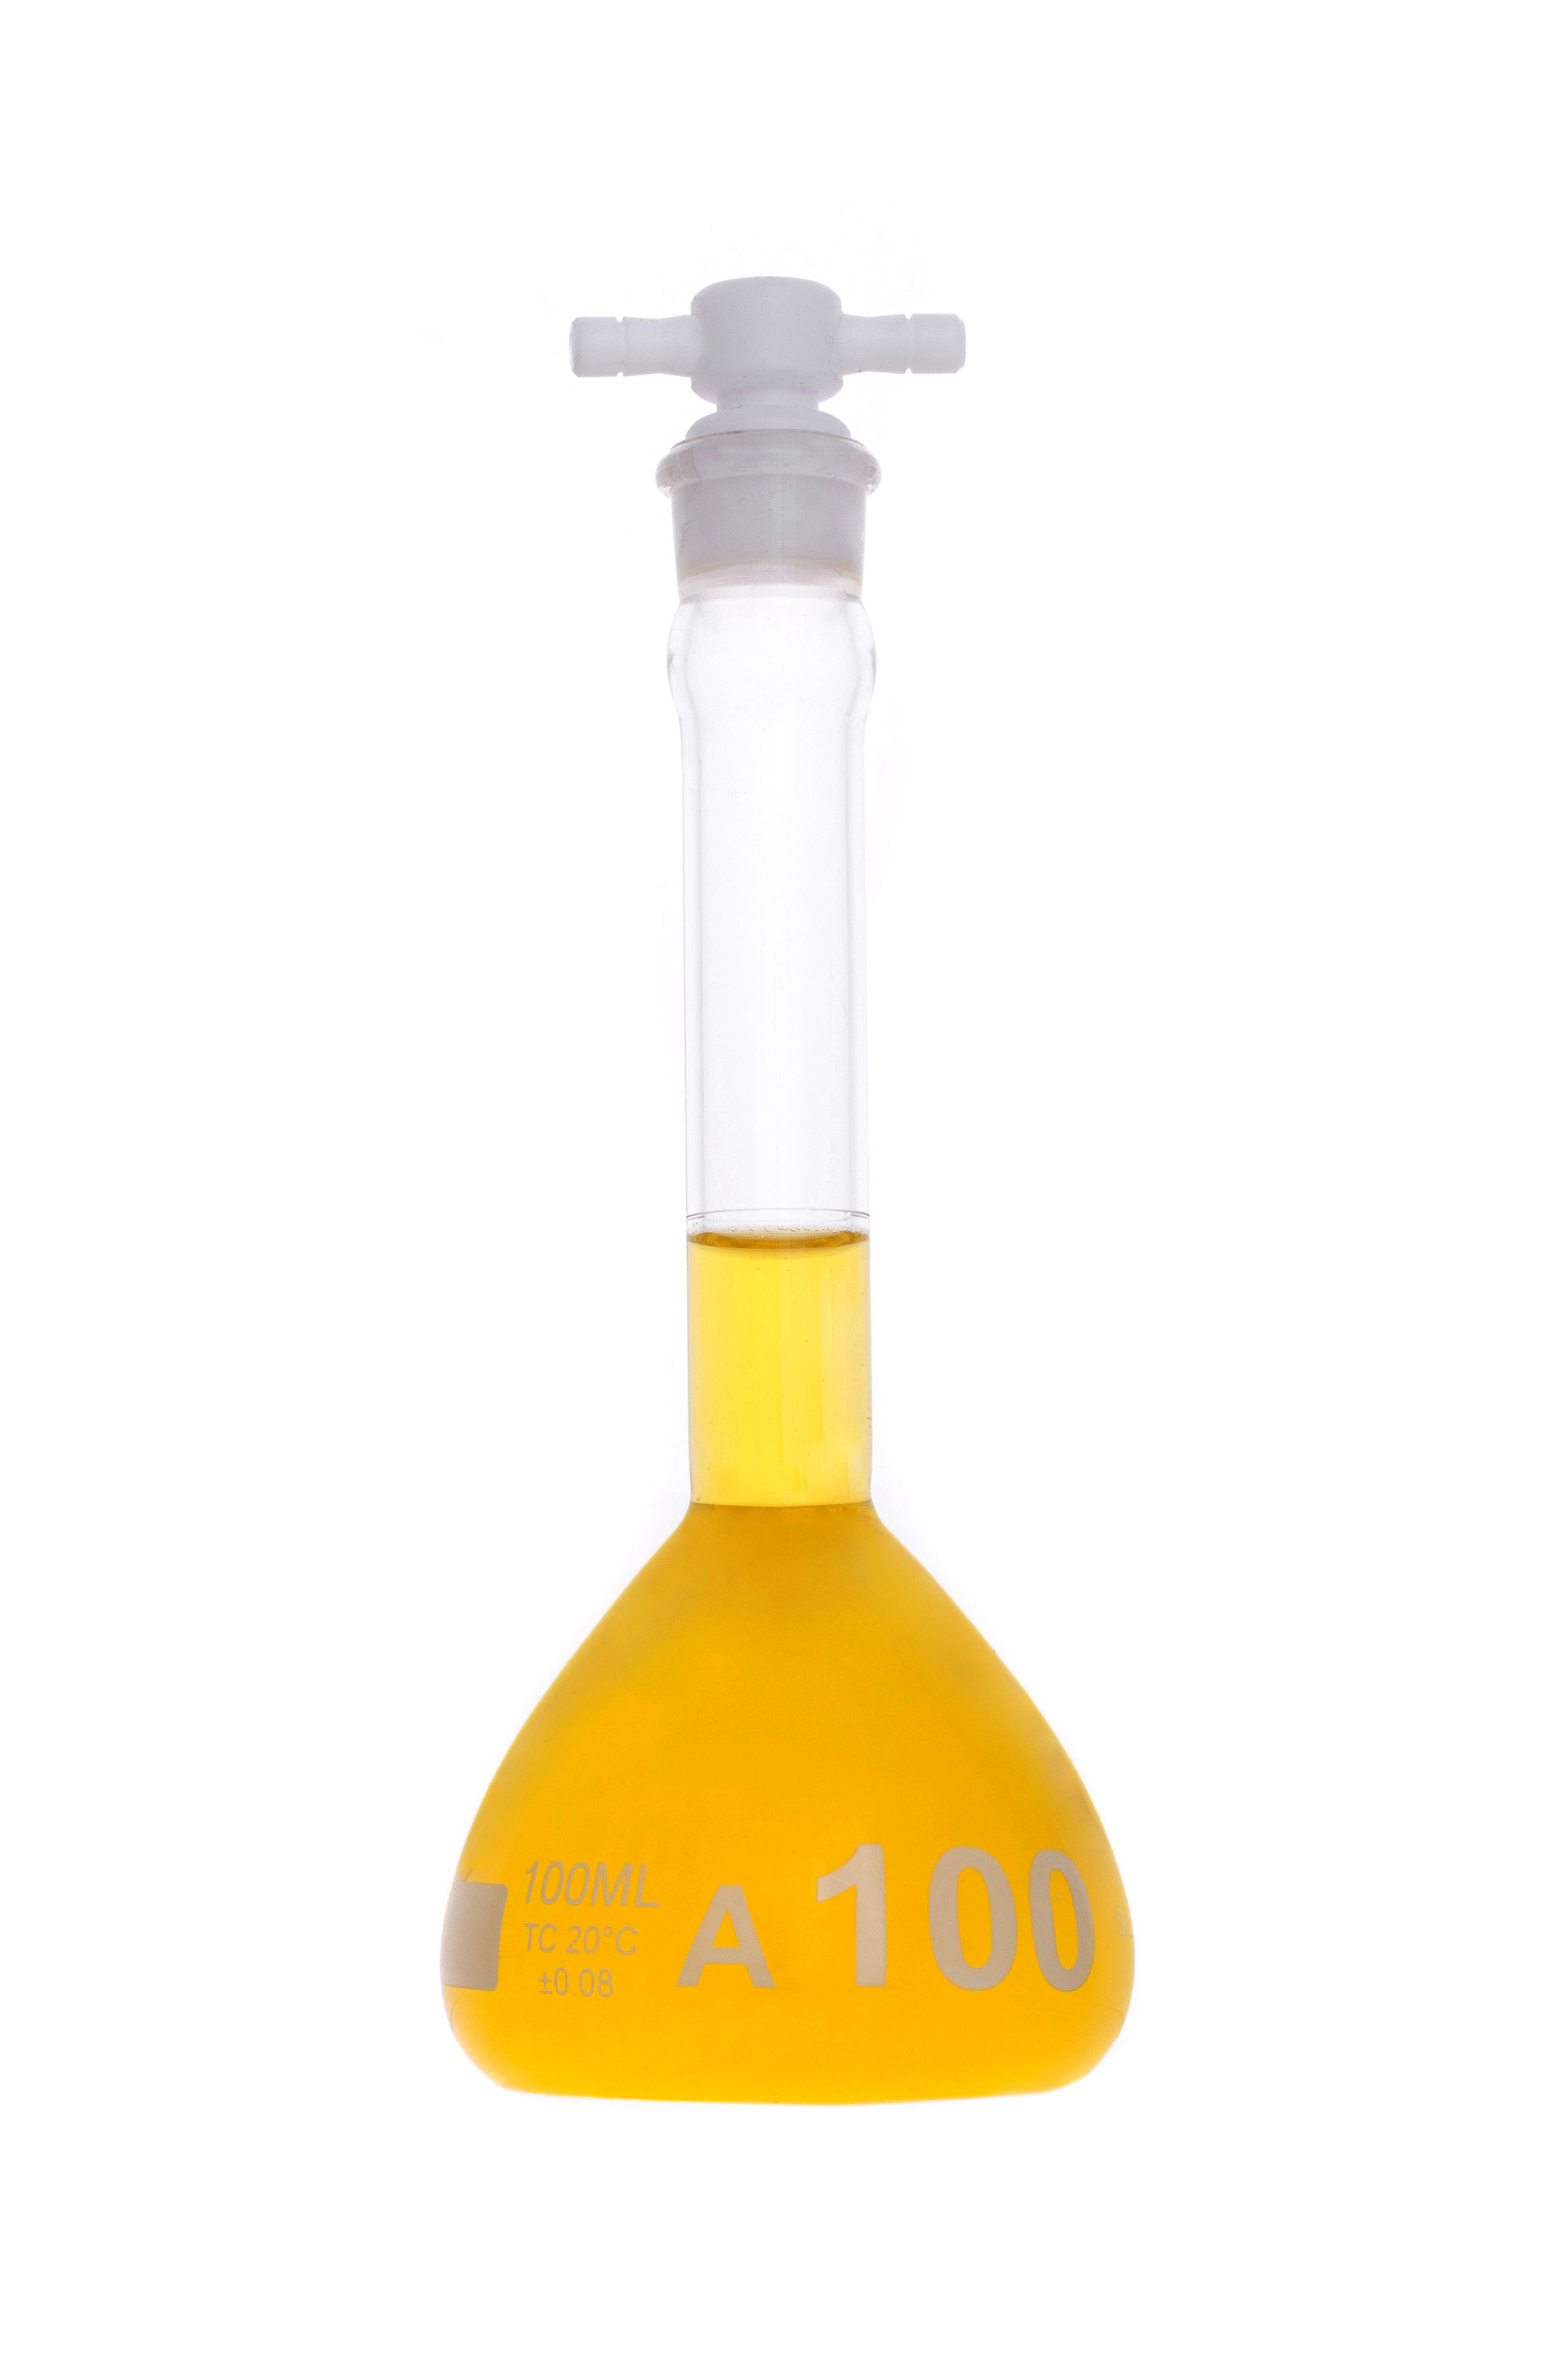 CHEM SCIENCE INC 129.702.08 Volumetric Flask Serialized and Certified with One Graduation Mark Class A Narrow Mouth Capacity 500 mL with Teflon Stopper Size # 19 Sati International Inc. 